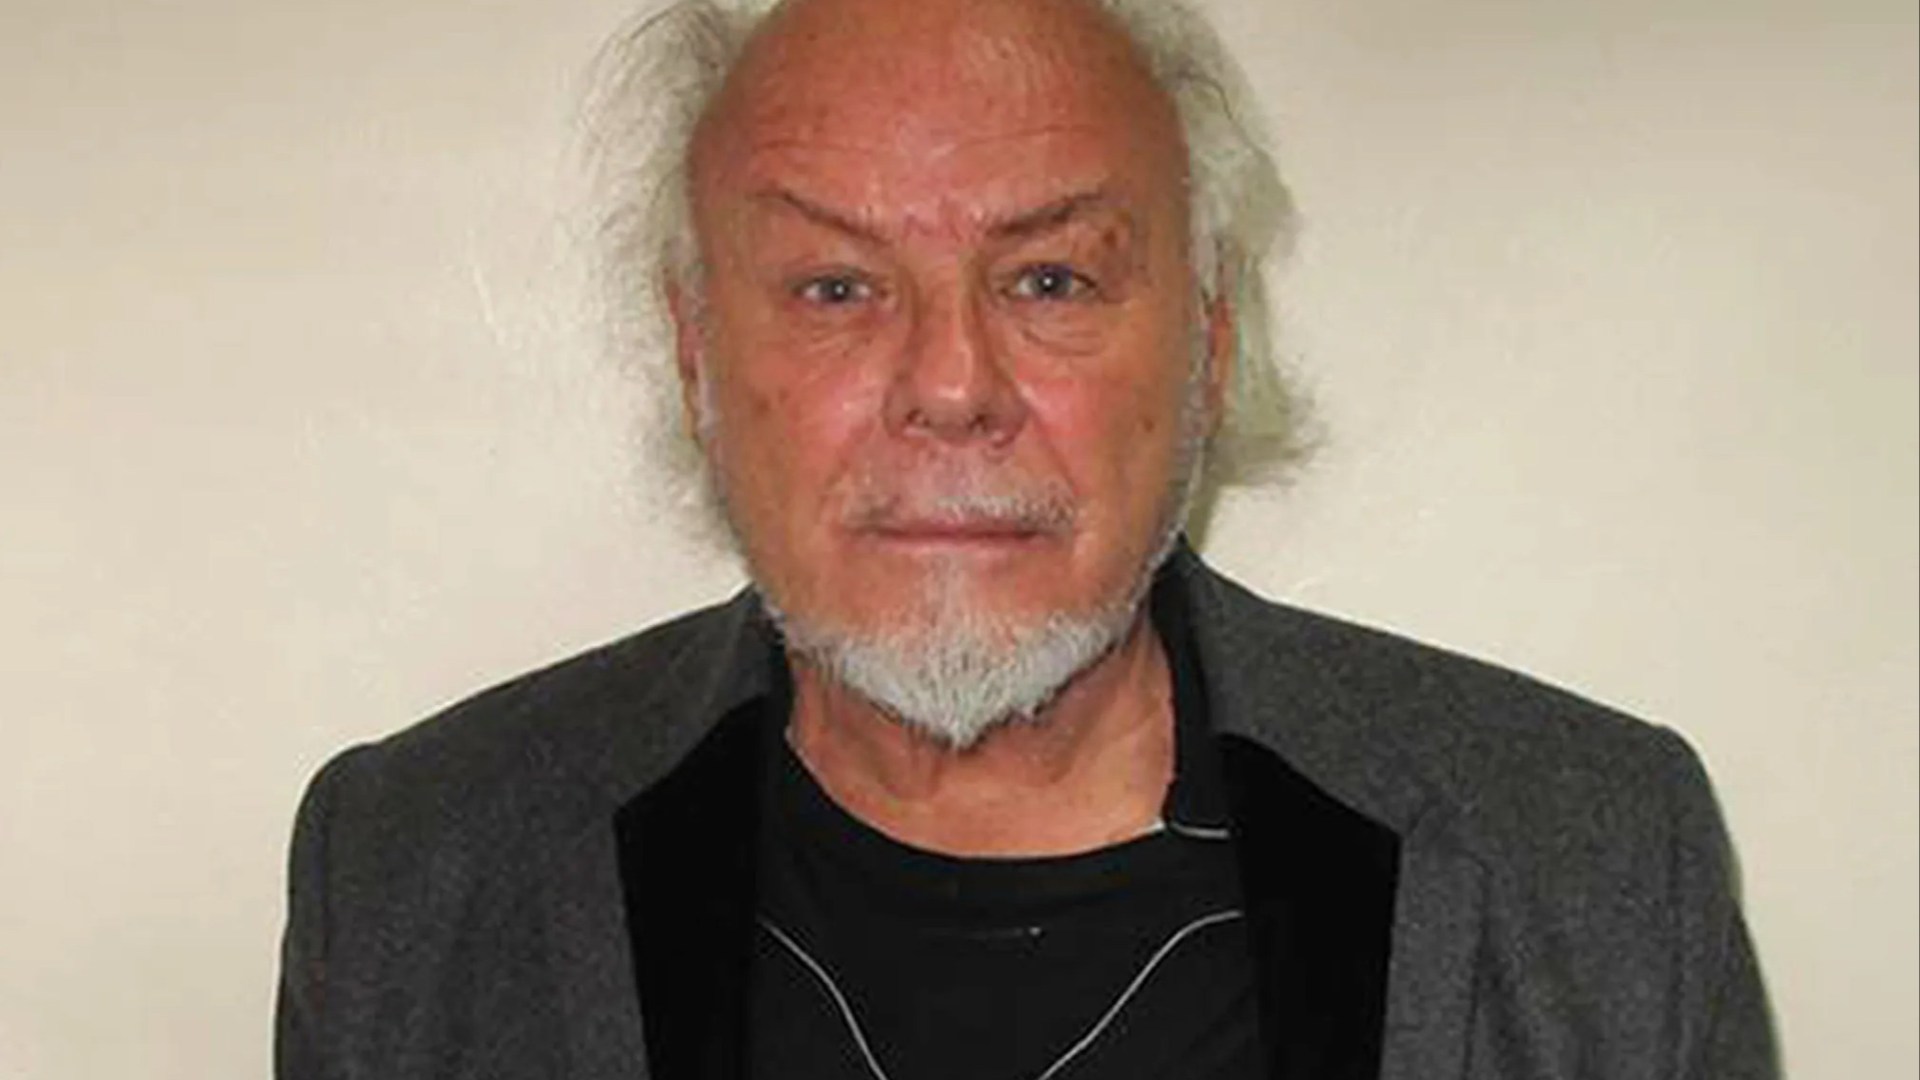 Gary Glitter’s Victim Awarded £700,000 Damages – Justice Served